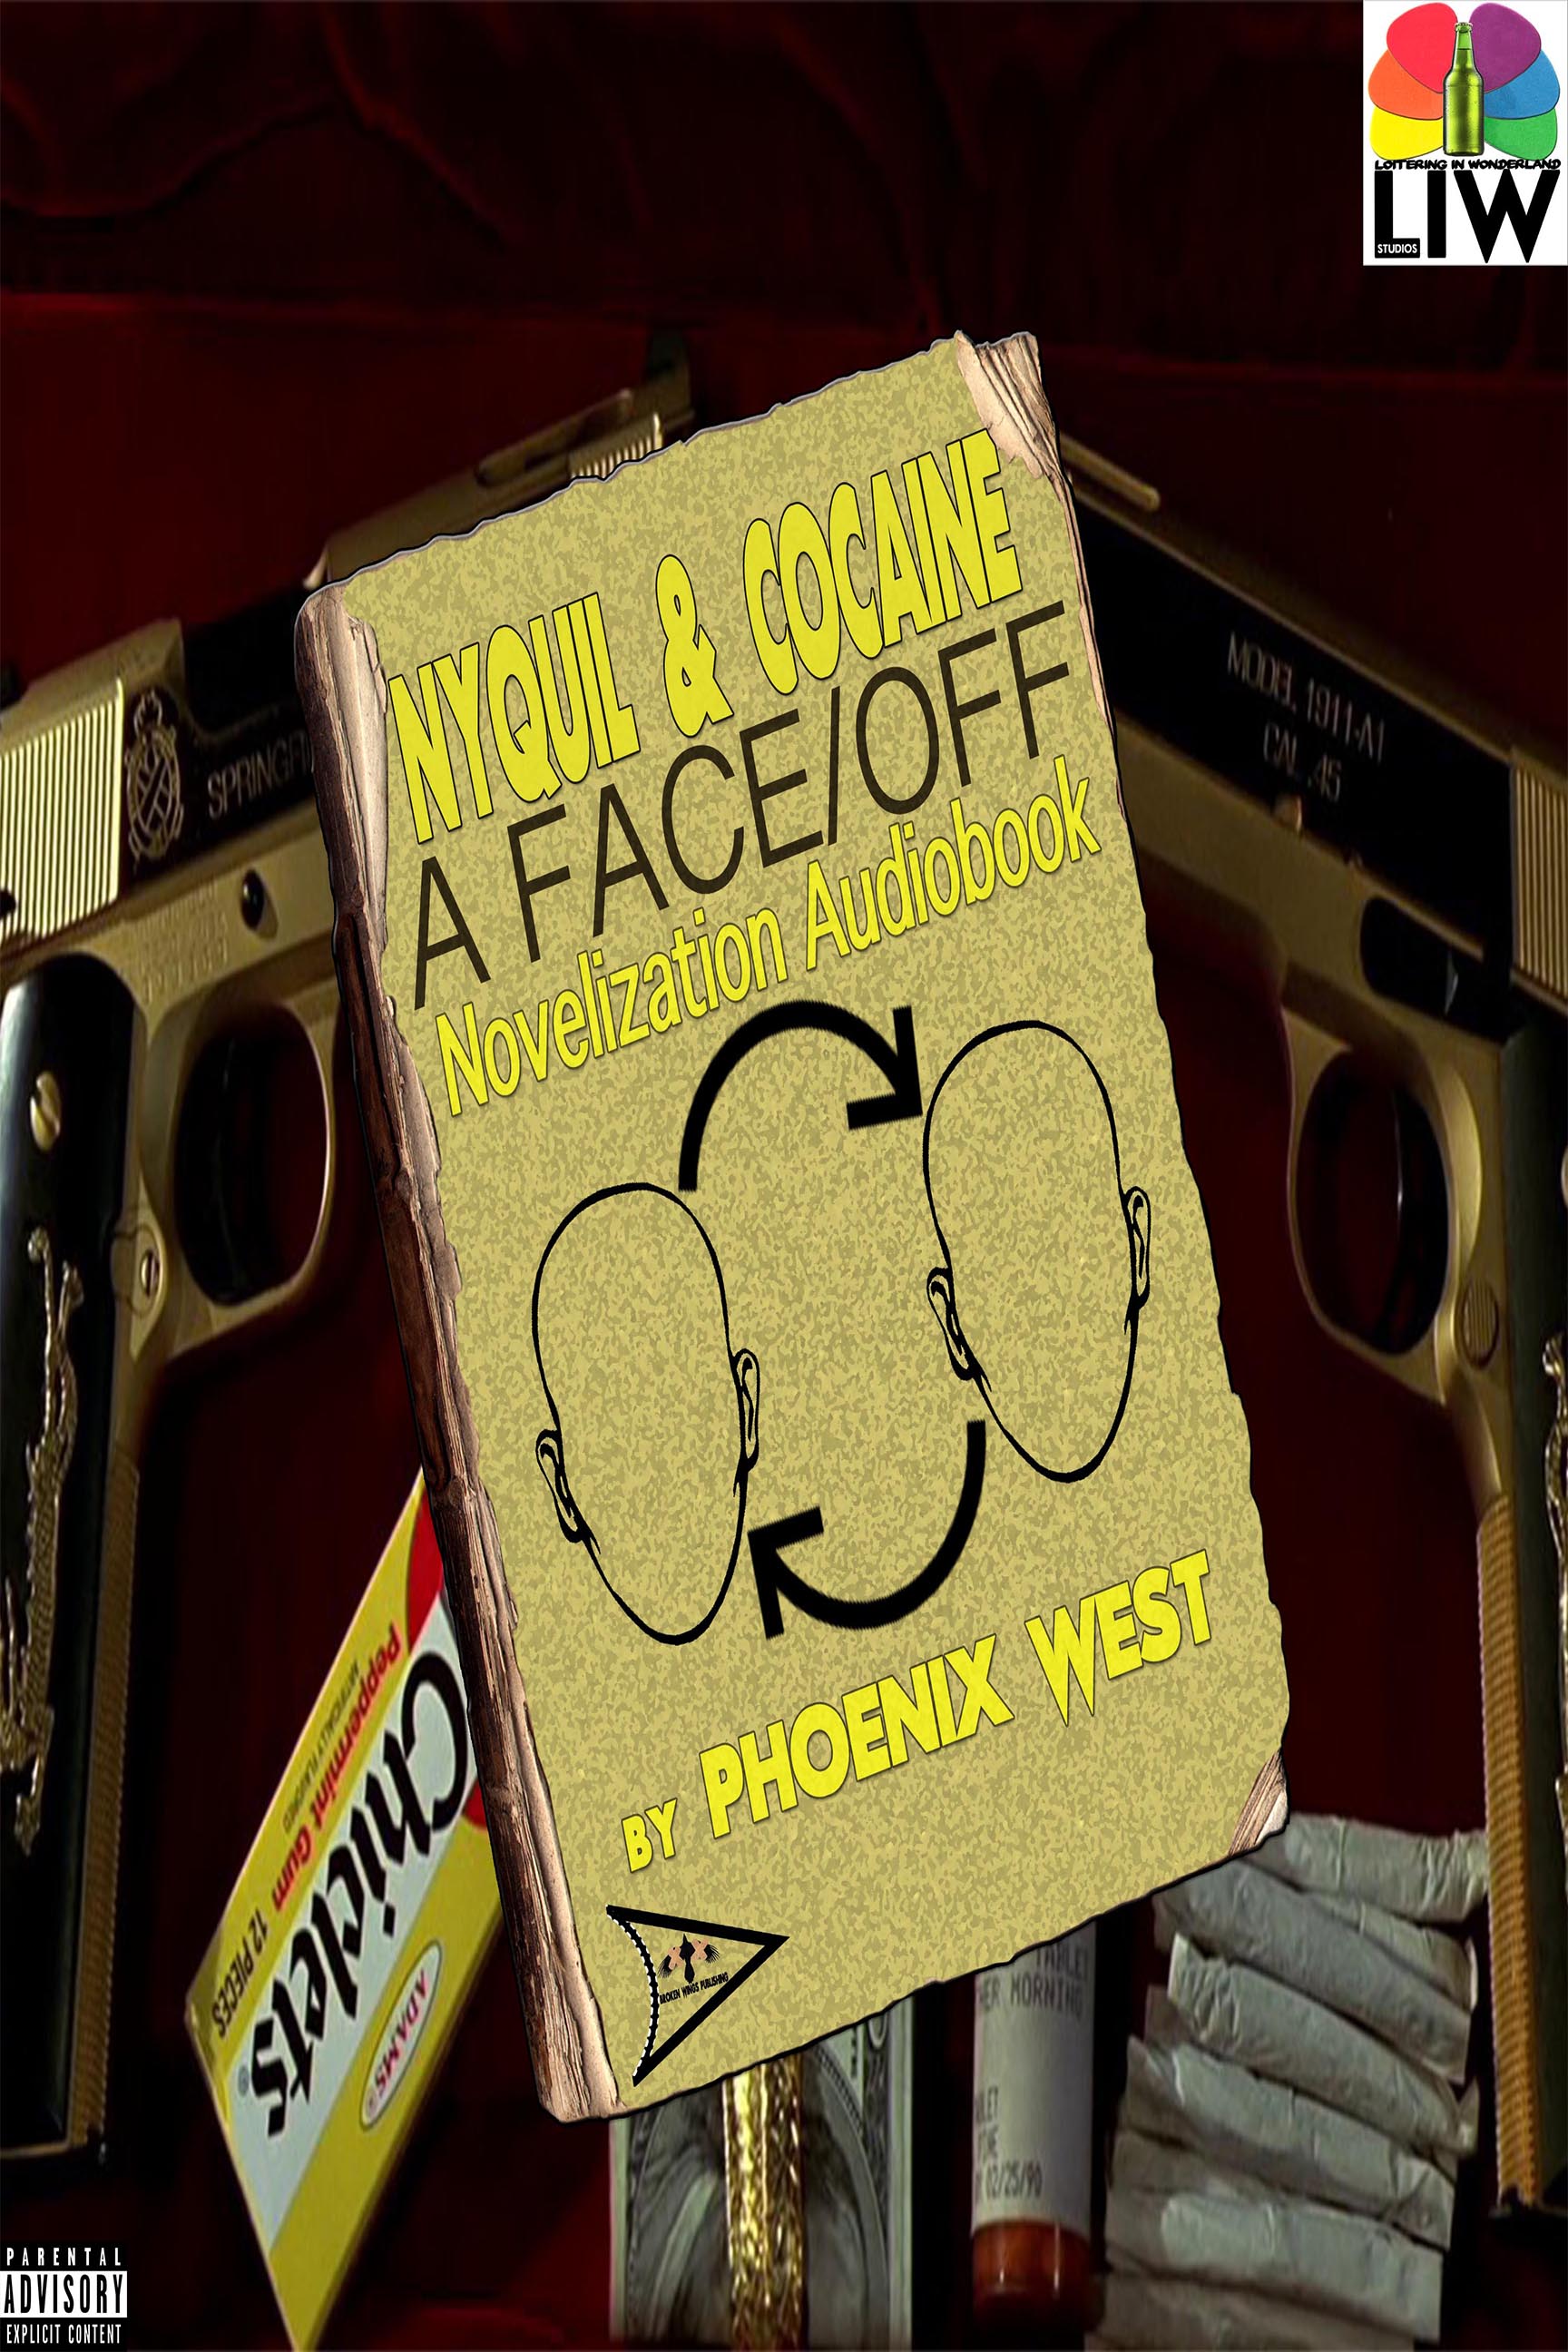 NyQuil & Cocaine: A Face/Off Novelization Audiobook & Video Review